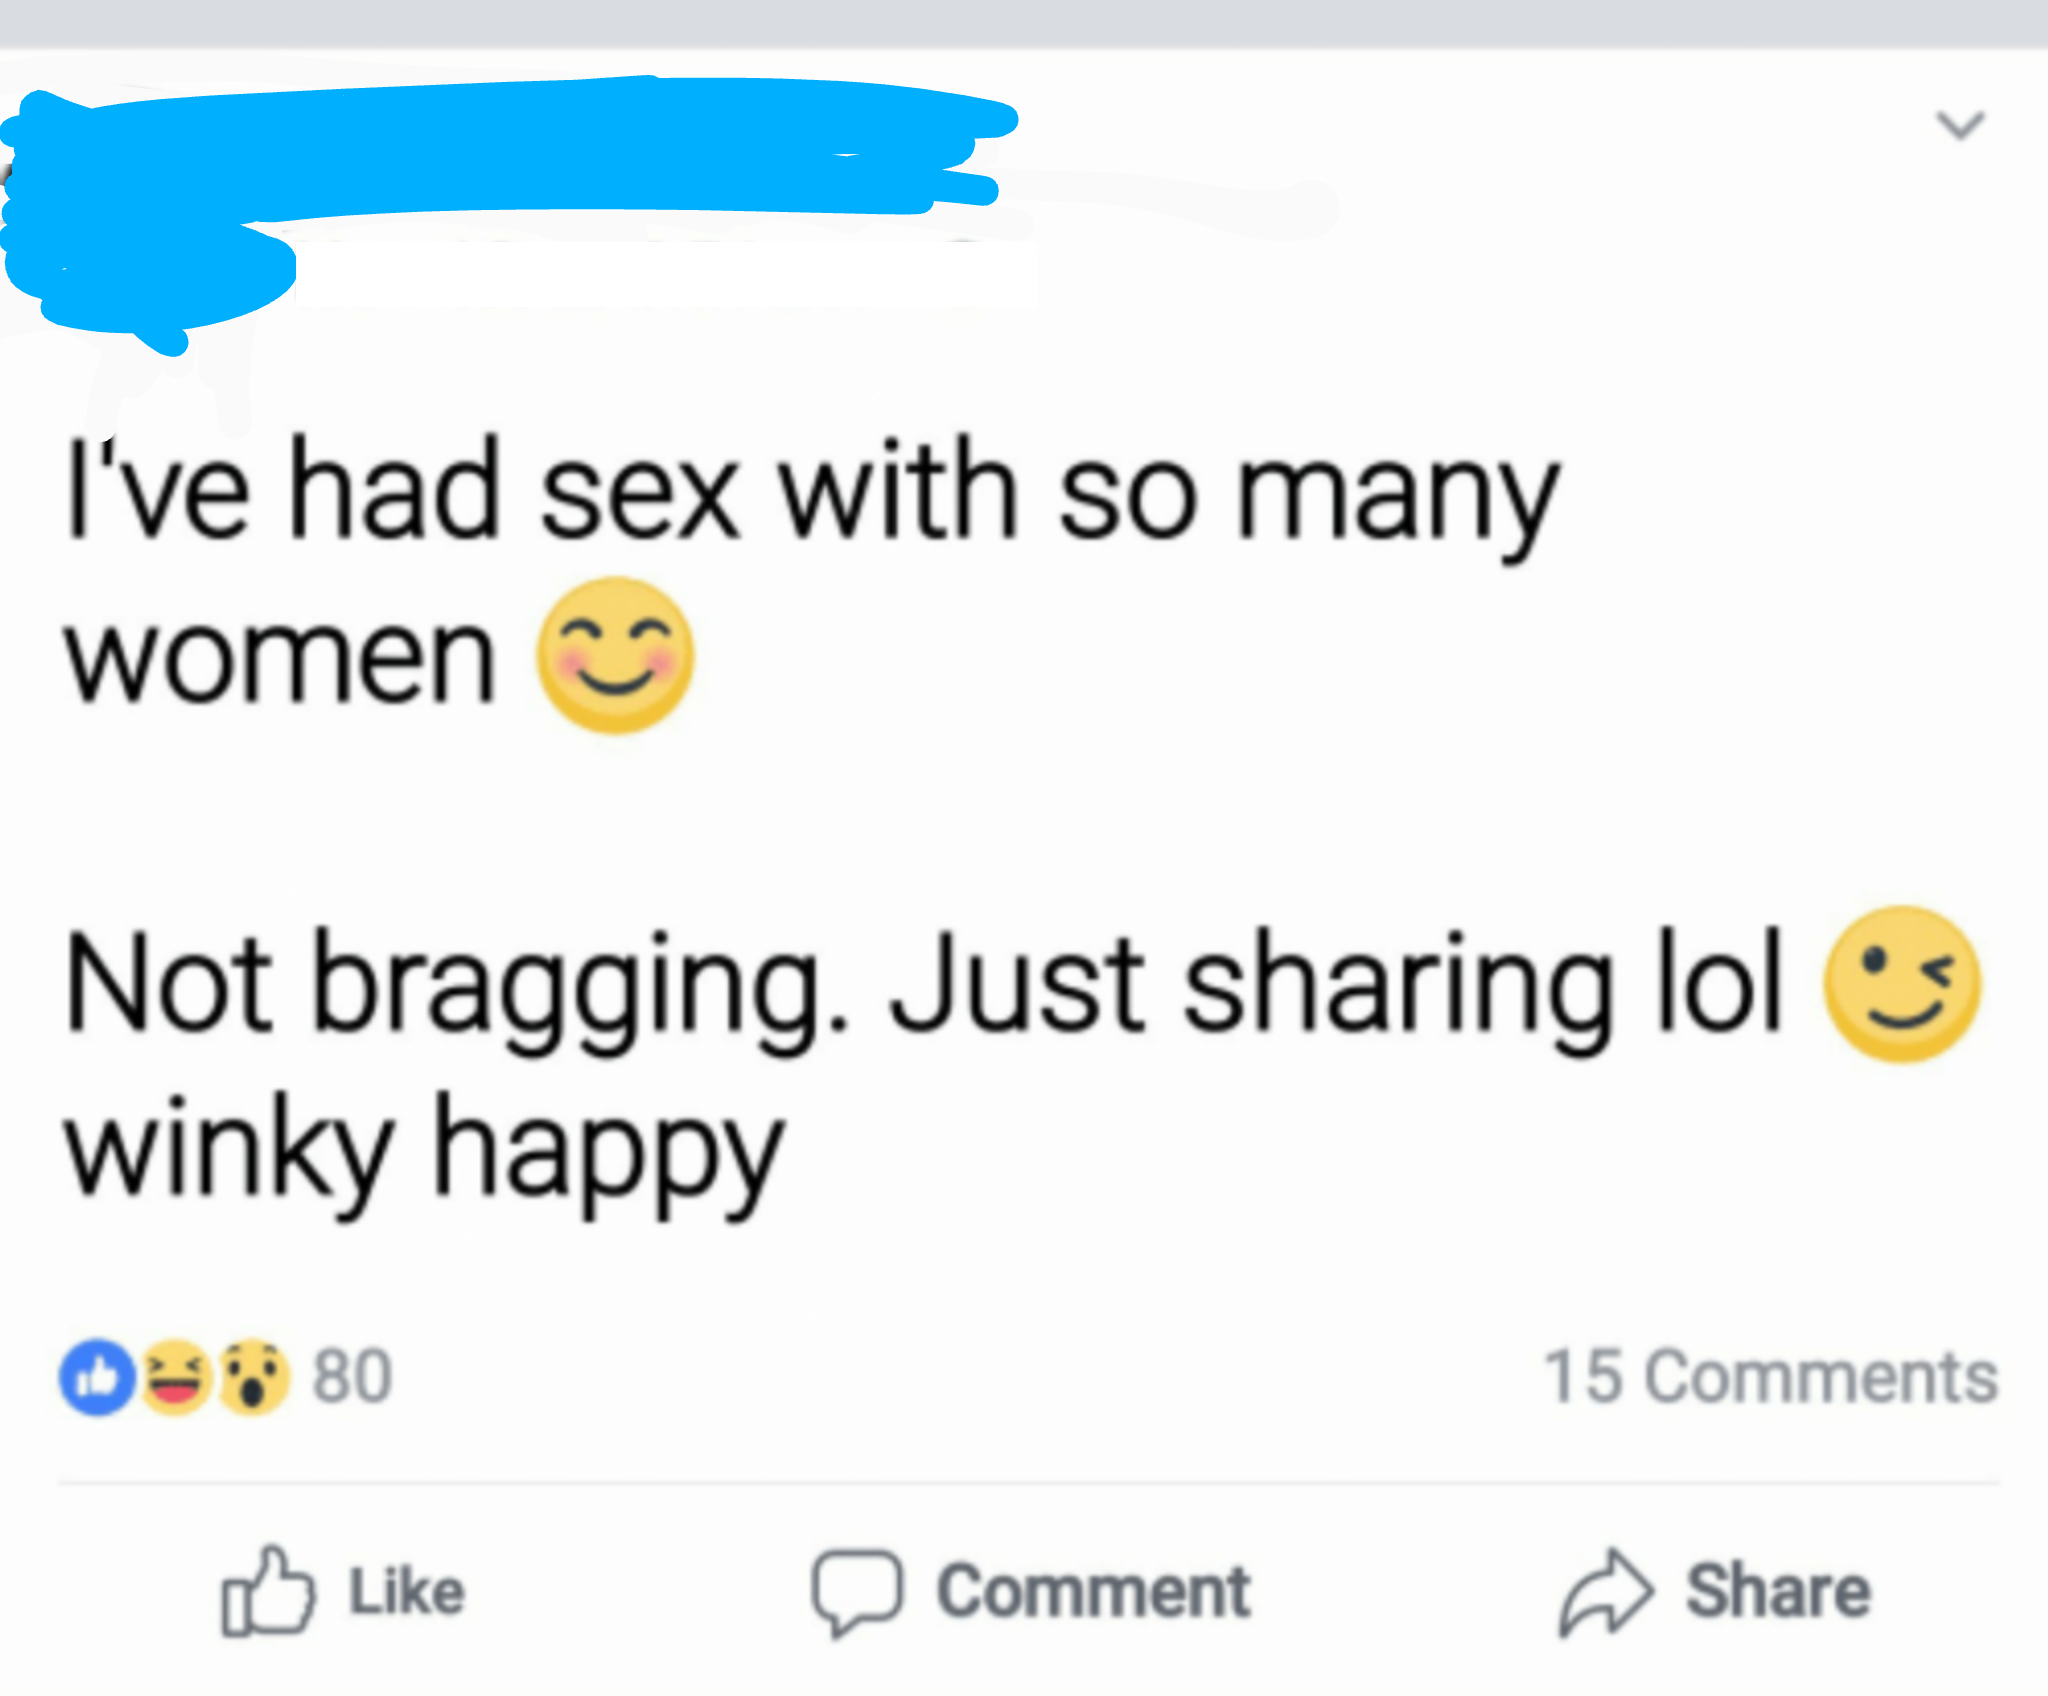 metropolitan market - I've had sex with so many women Not bragging. Just sharing lol winky happy 08980 Comment 15